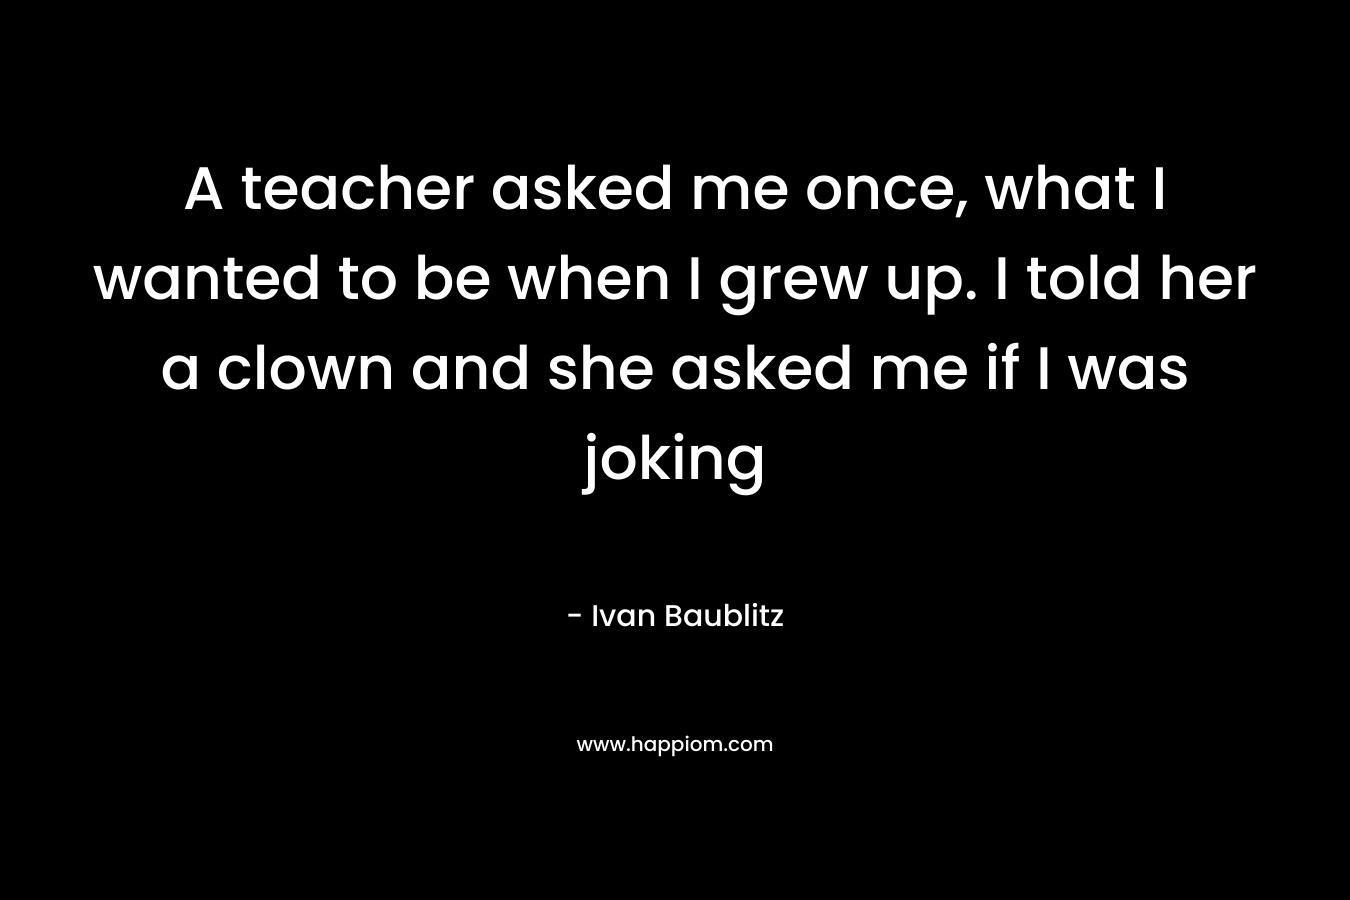 A teacher asked me once, what I wanted to be when I grew up. I told her a clown and she asked me if I was joking